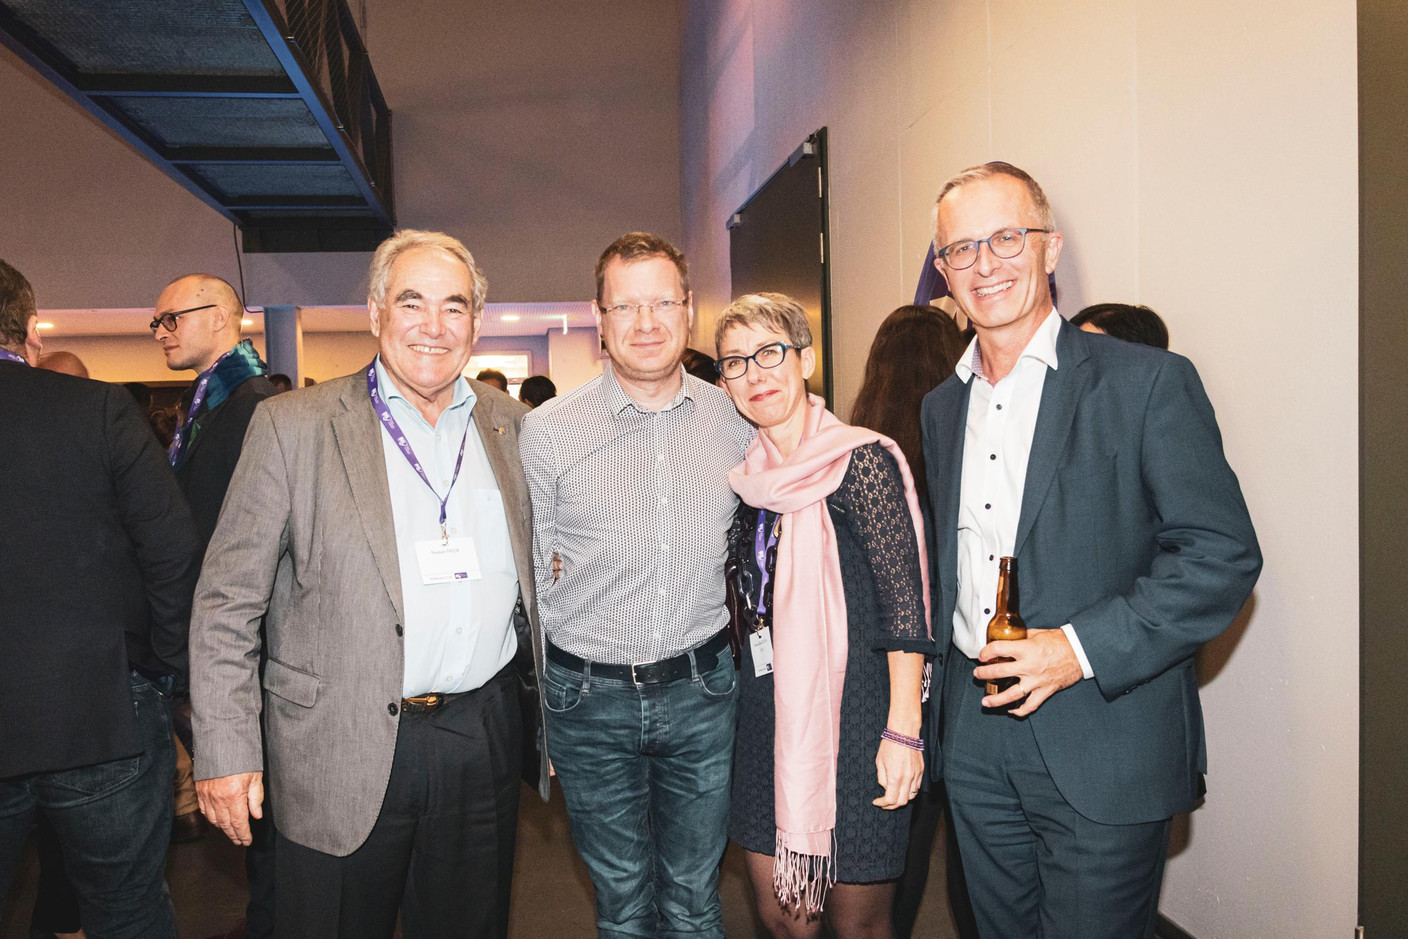 Norbert Friob, Jean-Michel Gaudron (Luxinnovation), Anne-Claire Delval (Deep.lu) et  Paul Irthum (Banque Degroof Petercam Luxembourg) (Photo: Patricia Pitsch/Maison Moderne)